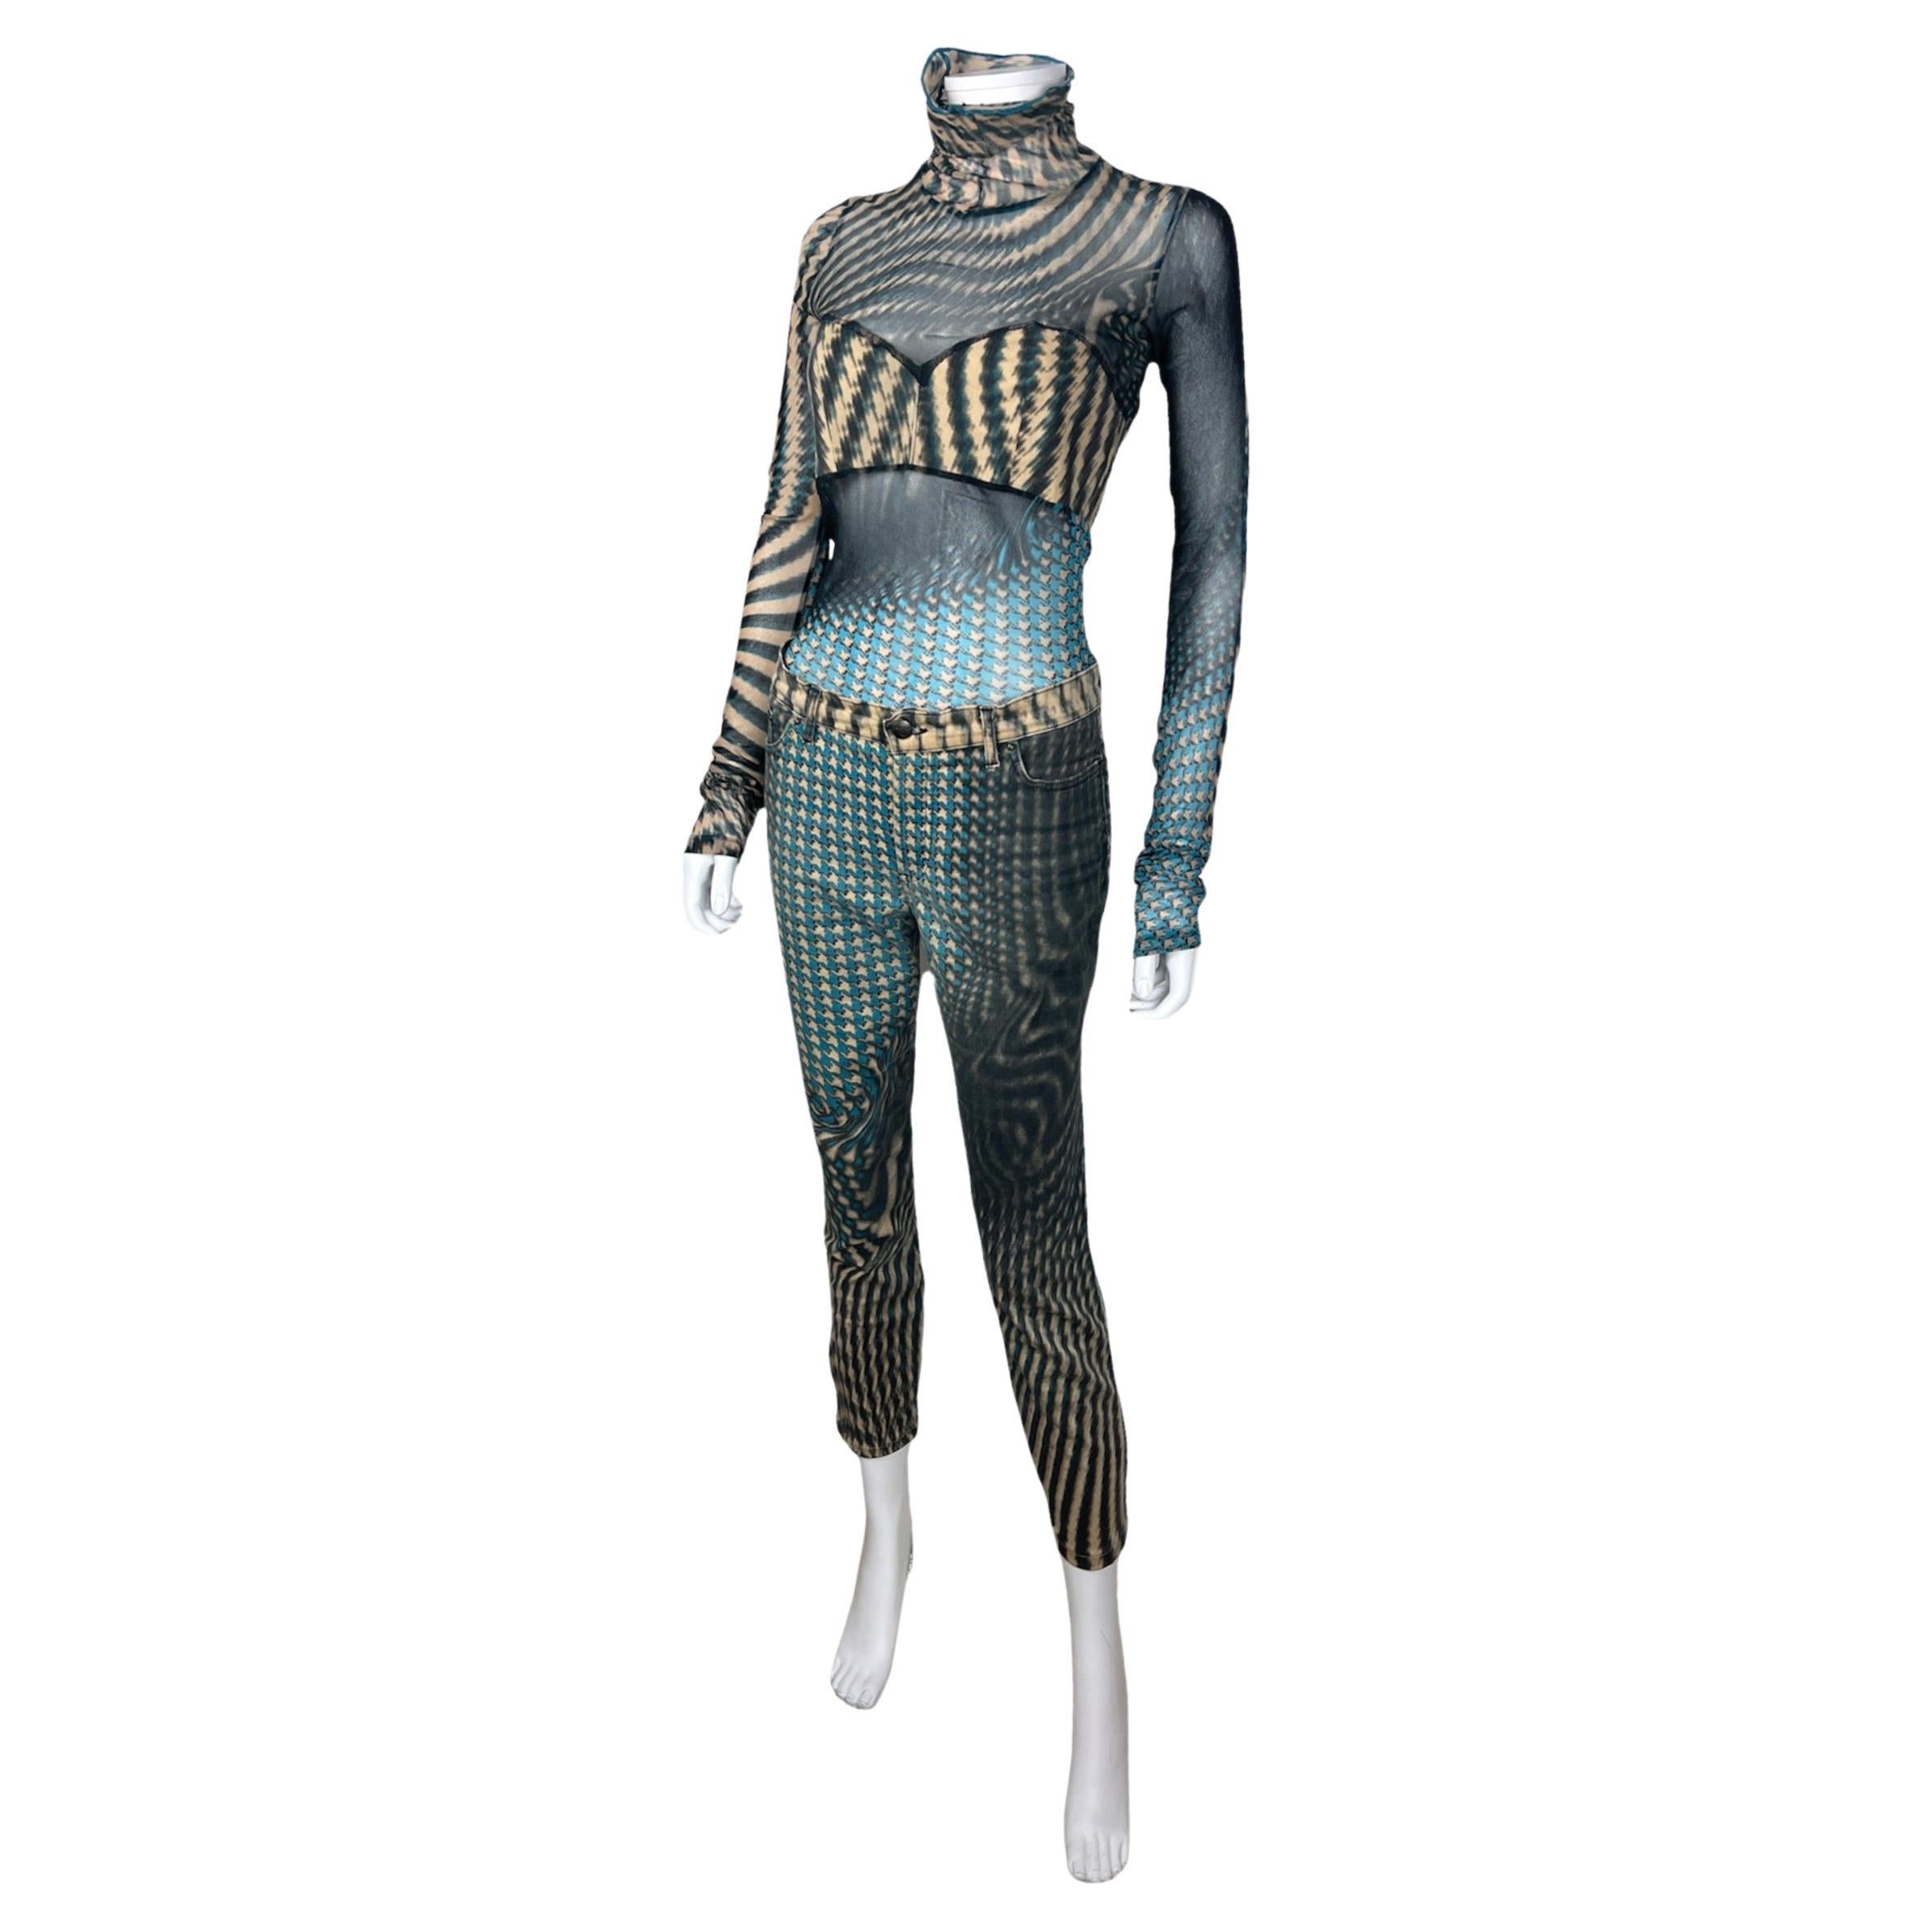 JUST CAVALLI, Made in Italy, circa 2000.
Set composed of a mesh top and capri pants with a psychedelic print. 
The top is sheer, except on the breast. It seems to have been modified on the turtleneck, the seam on the front has been added. Also the